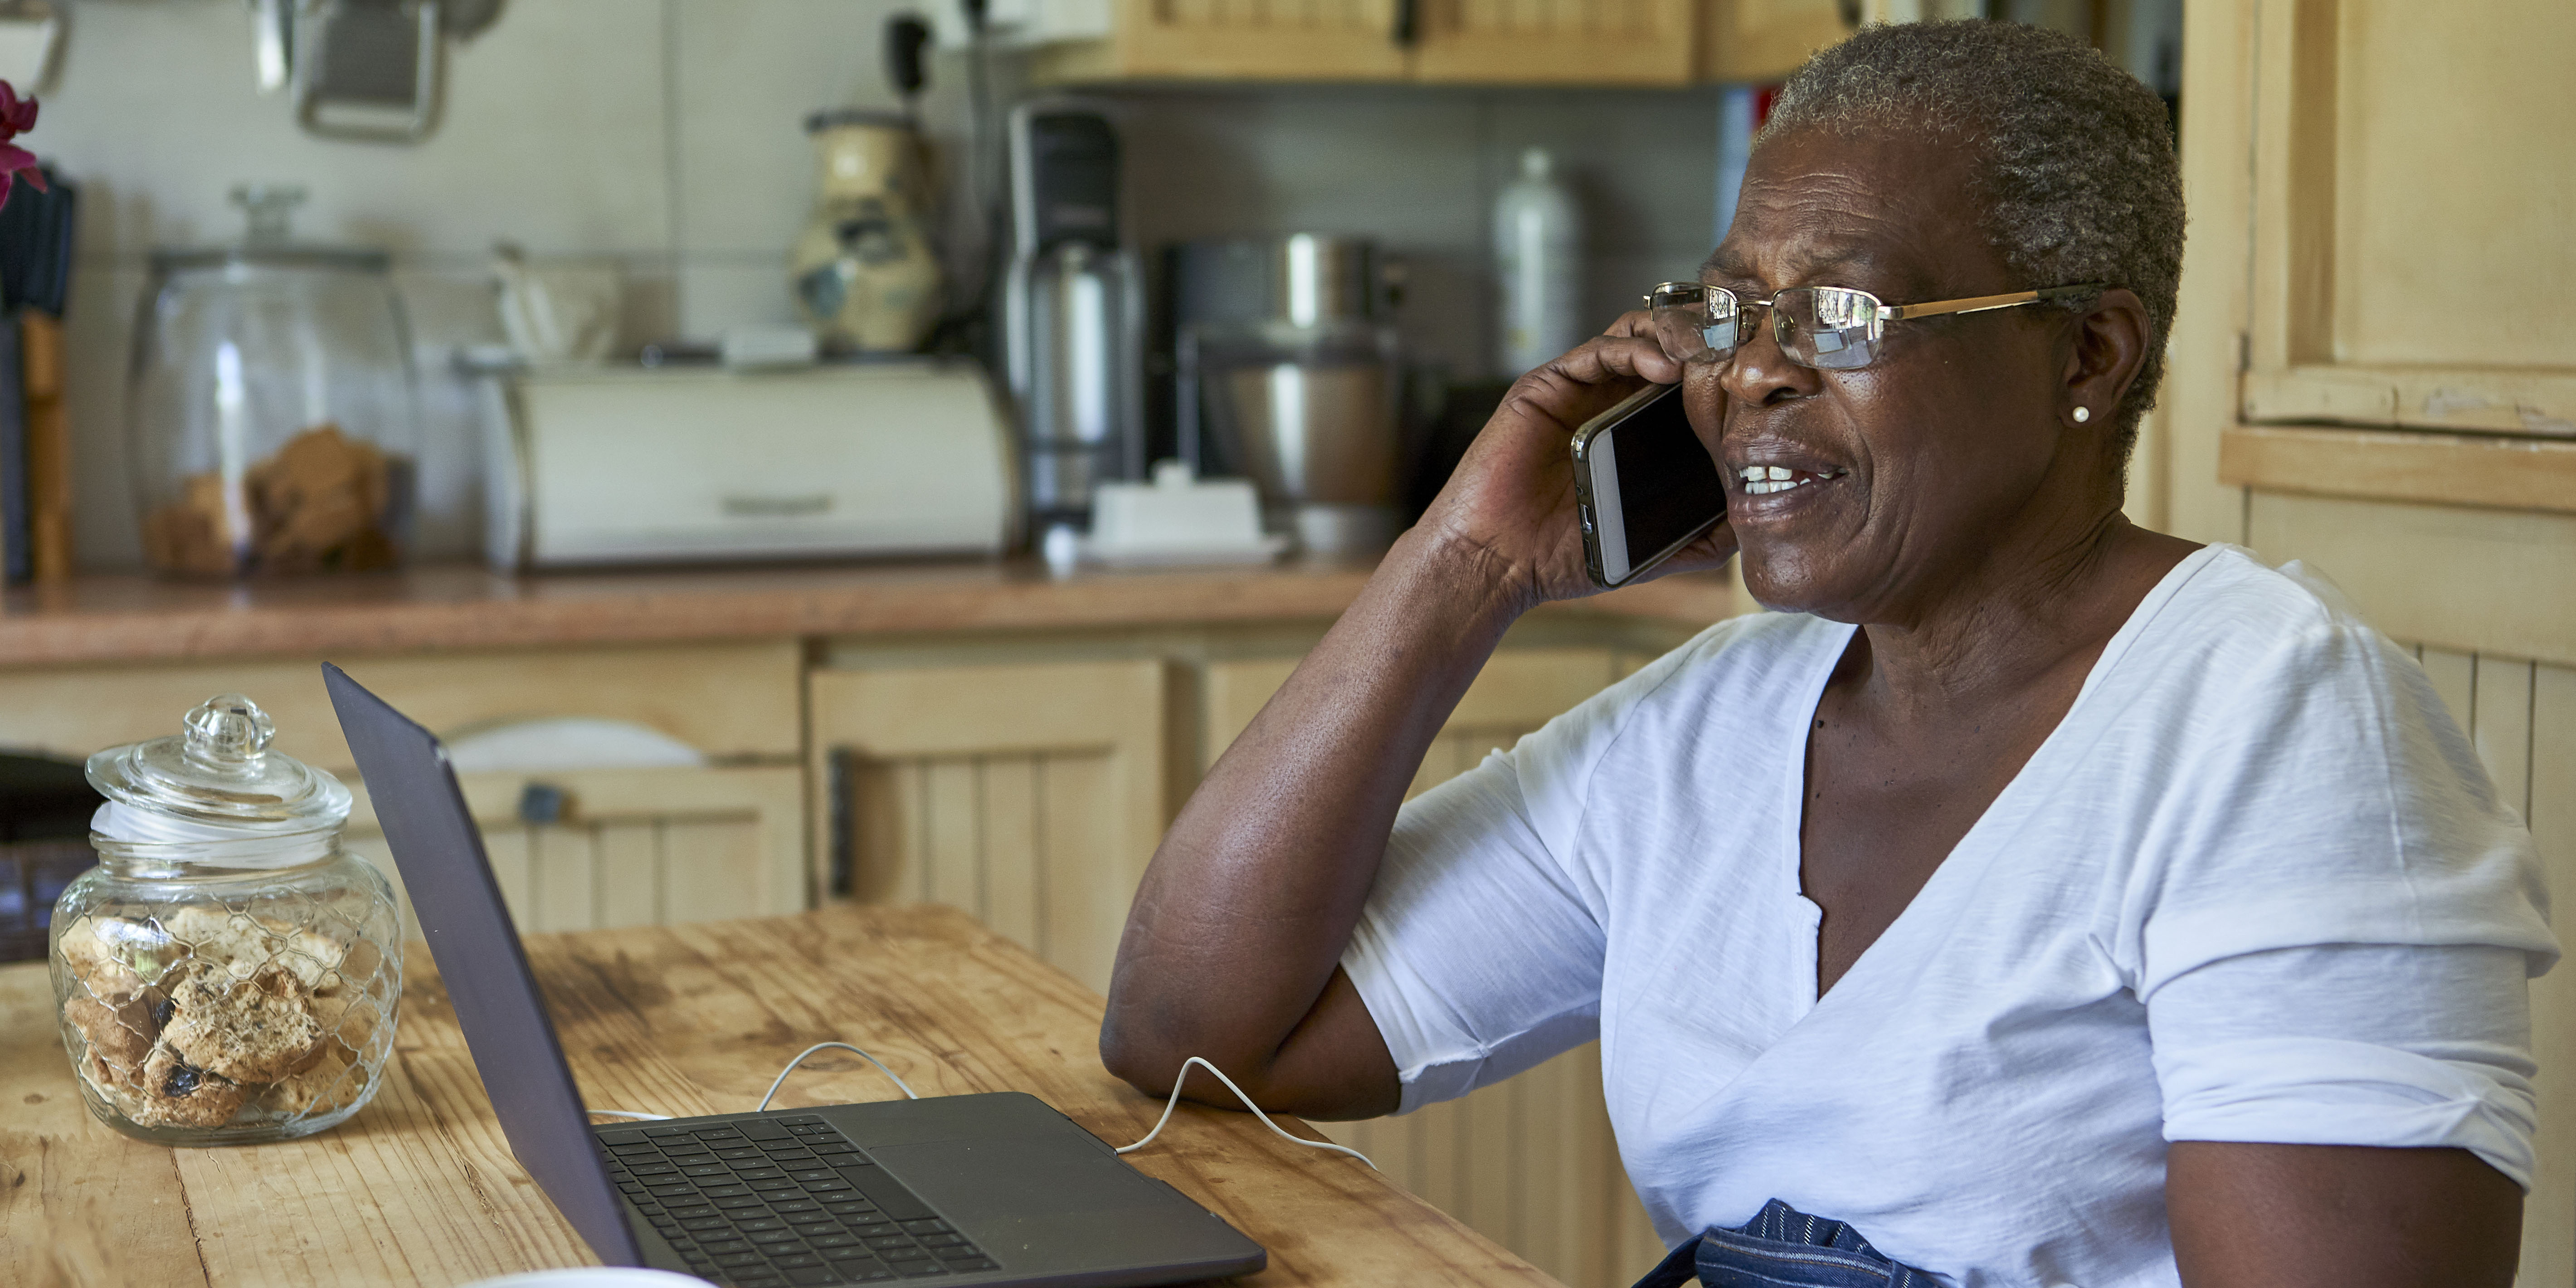 Senior woman sitting at kitchen table using laptop and smartphone